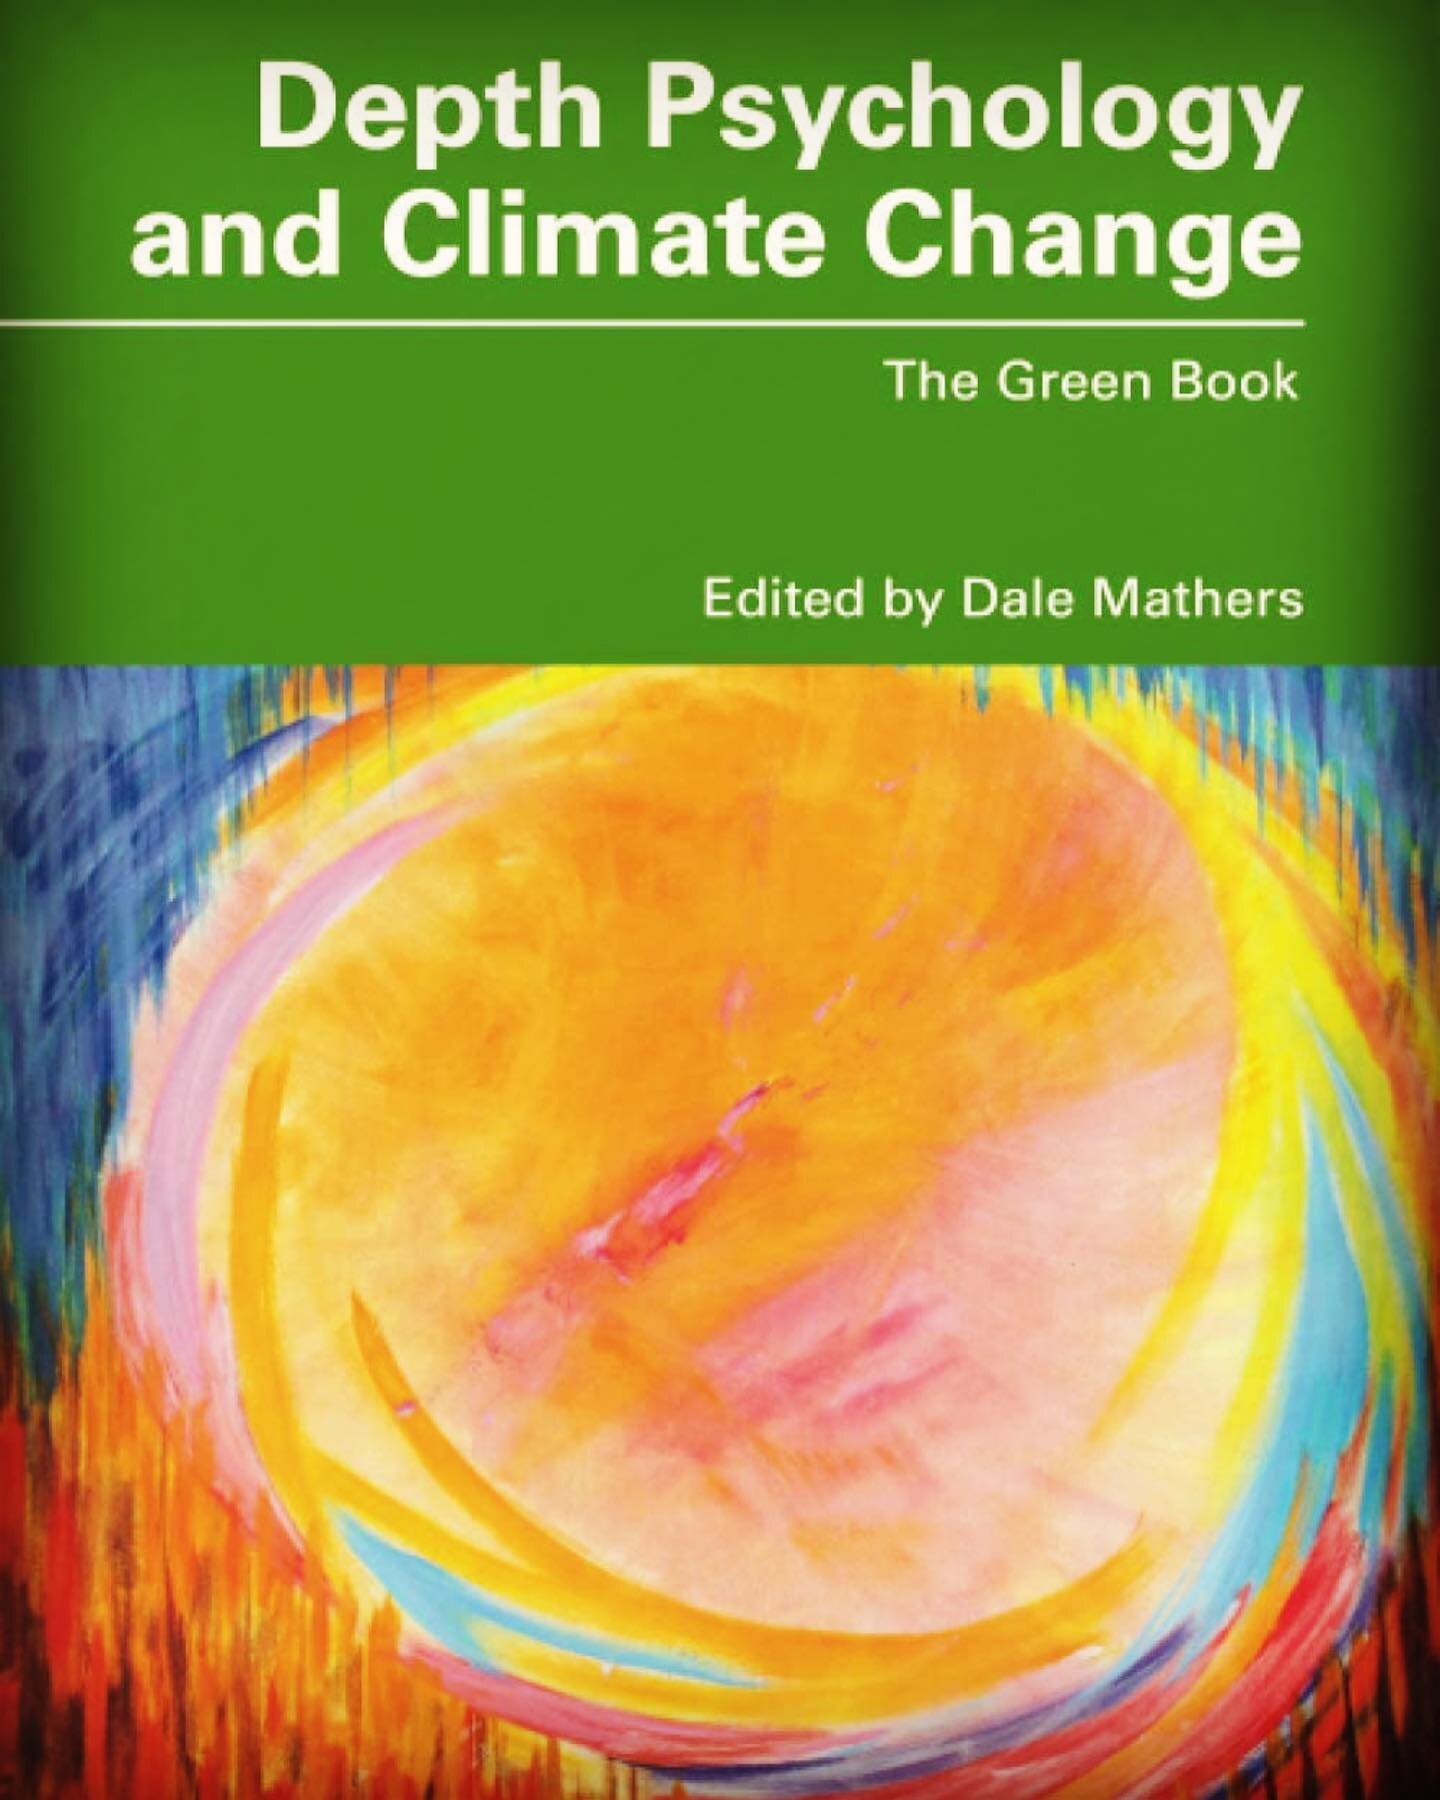 New Book Alert: Depth Psychology and Climate Change offers a sensitive and insightful look at how ideas from depth psychology can move us beyond psychological overwhelm when facing the ecological disaster of climate change and its denial. #climatecha